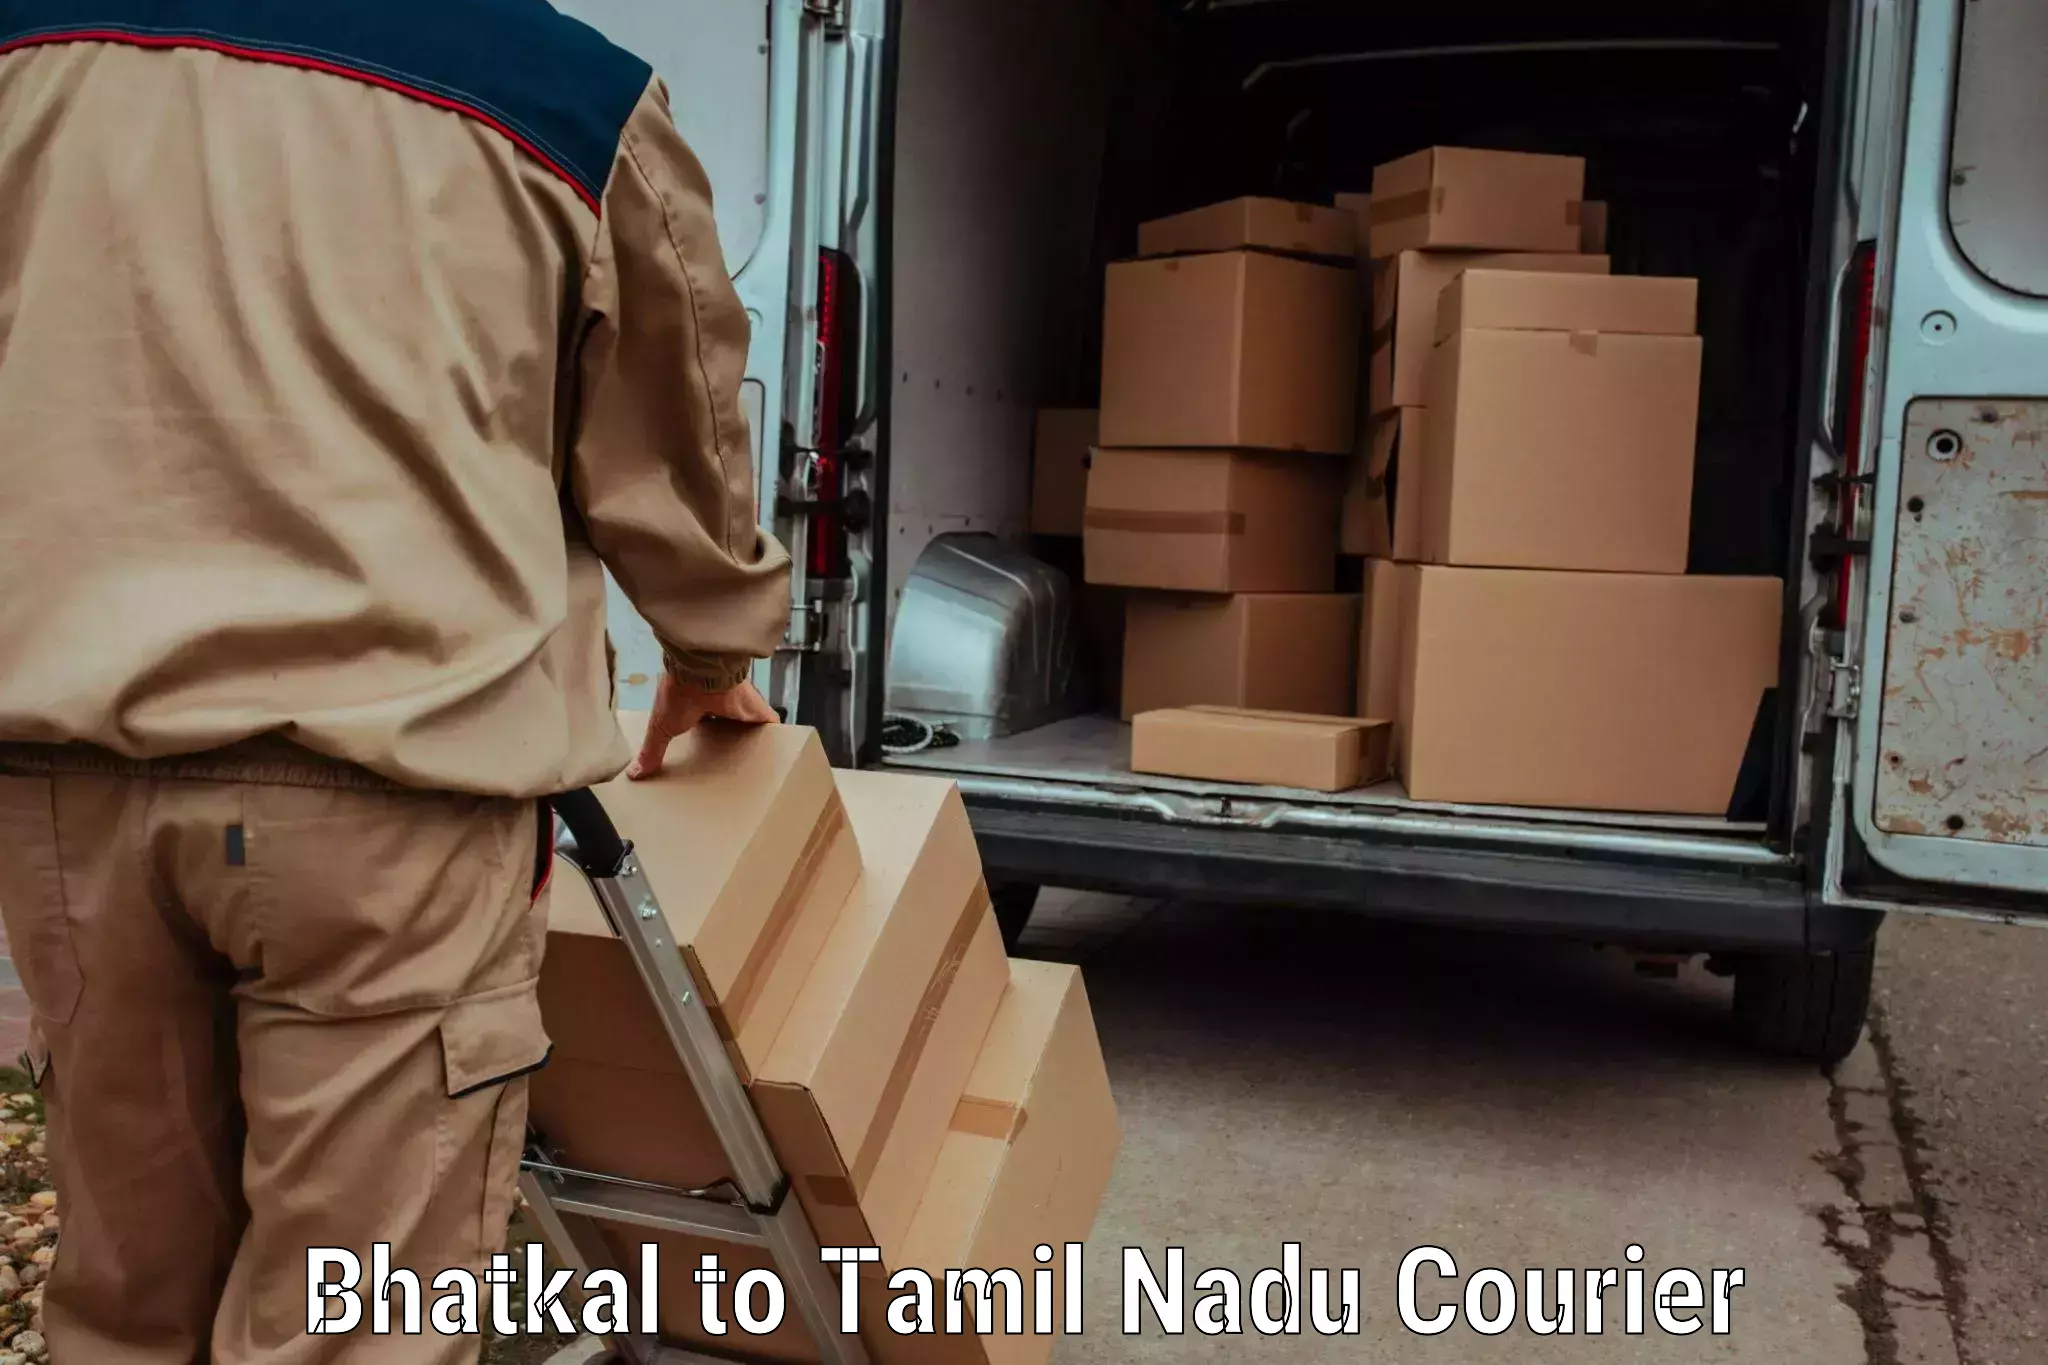 24-hour courier service Bhatkal to Thoppur